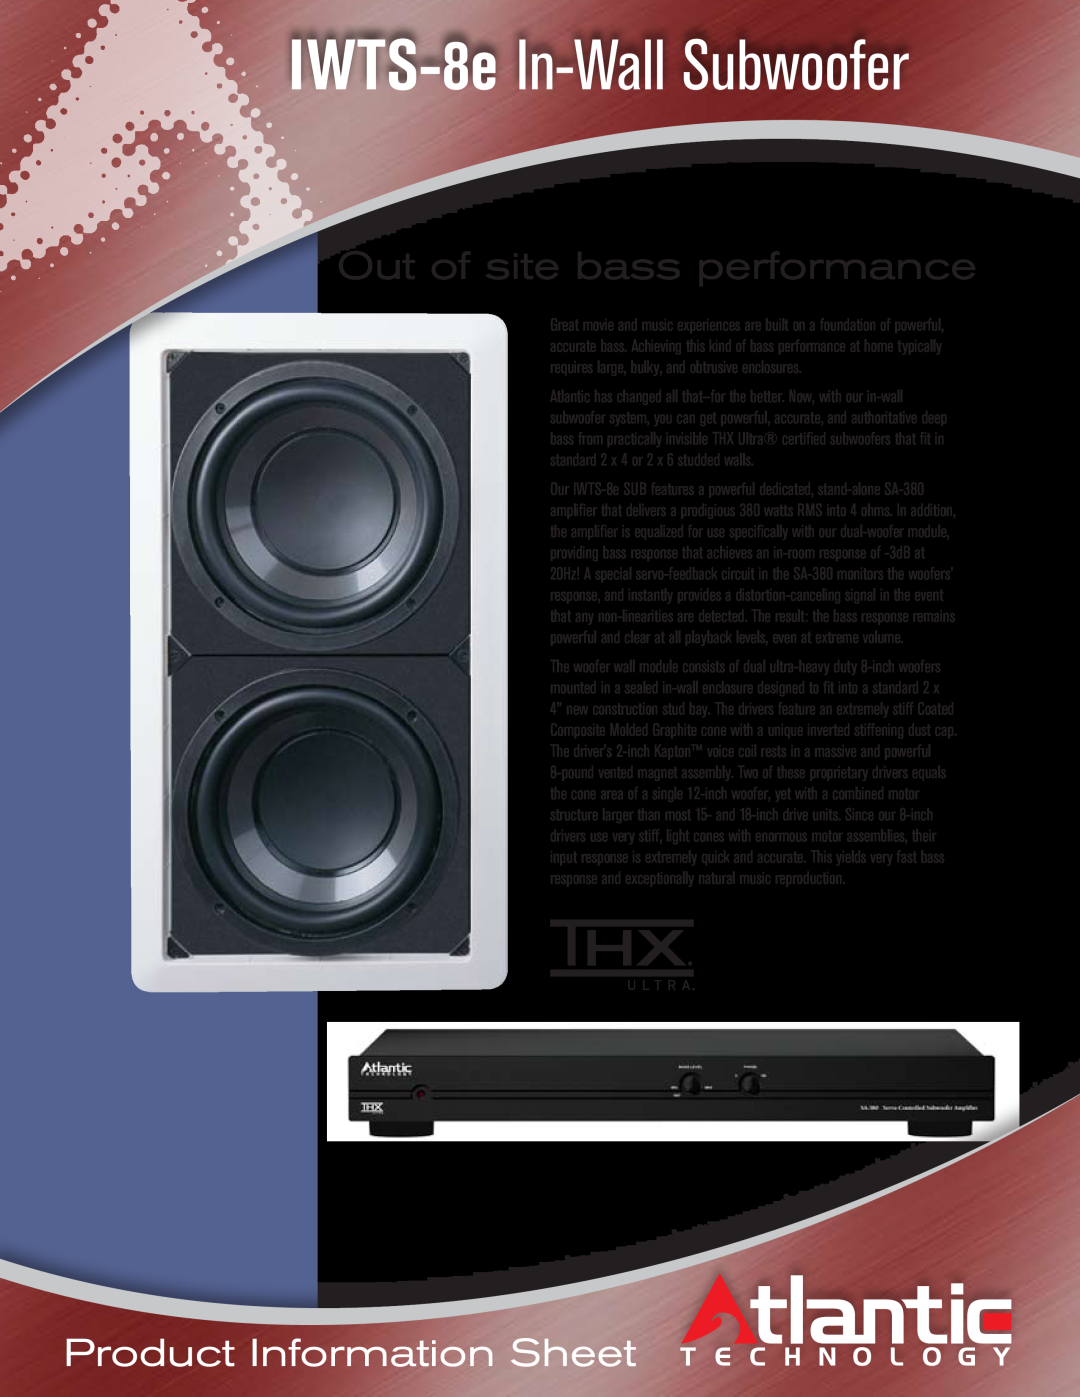 Atlantic Technology manual IWTS-8e In-WallSubwoofer, Out of site bass performance, Product Information Sheet 